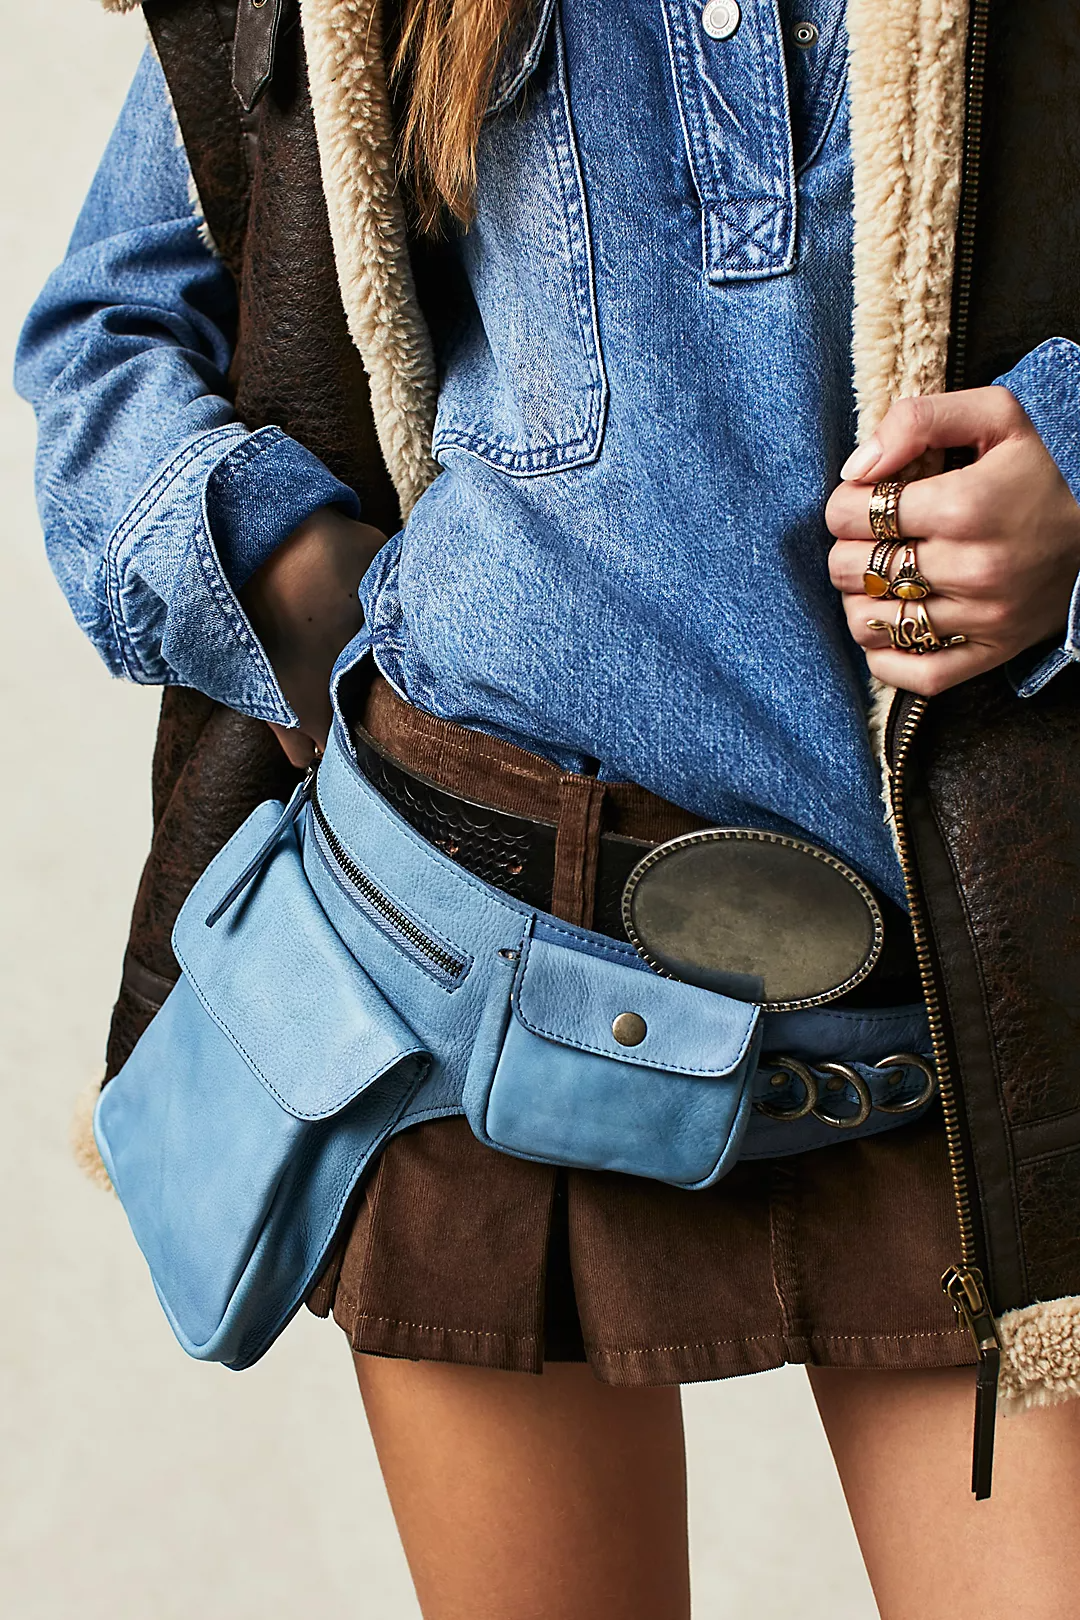 13 Best Belt Bags and Fanny Packs of 2023